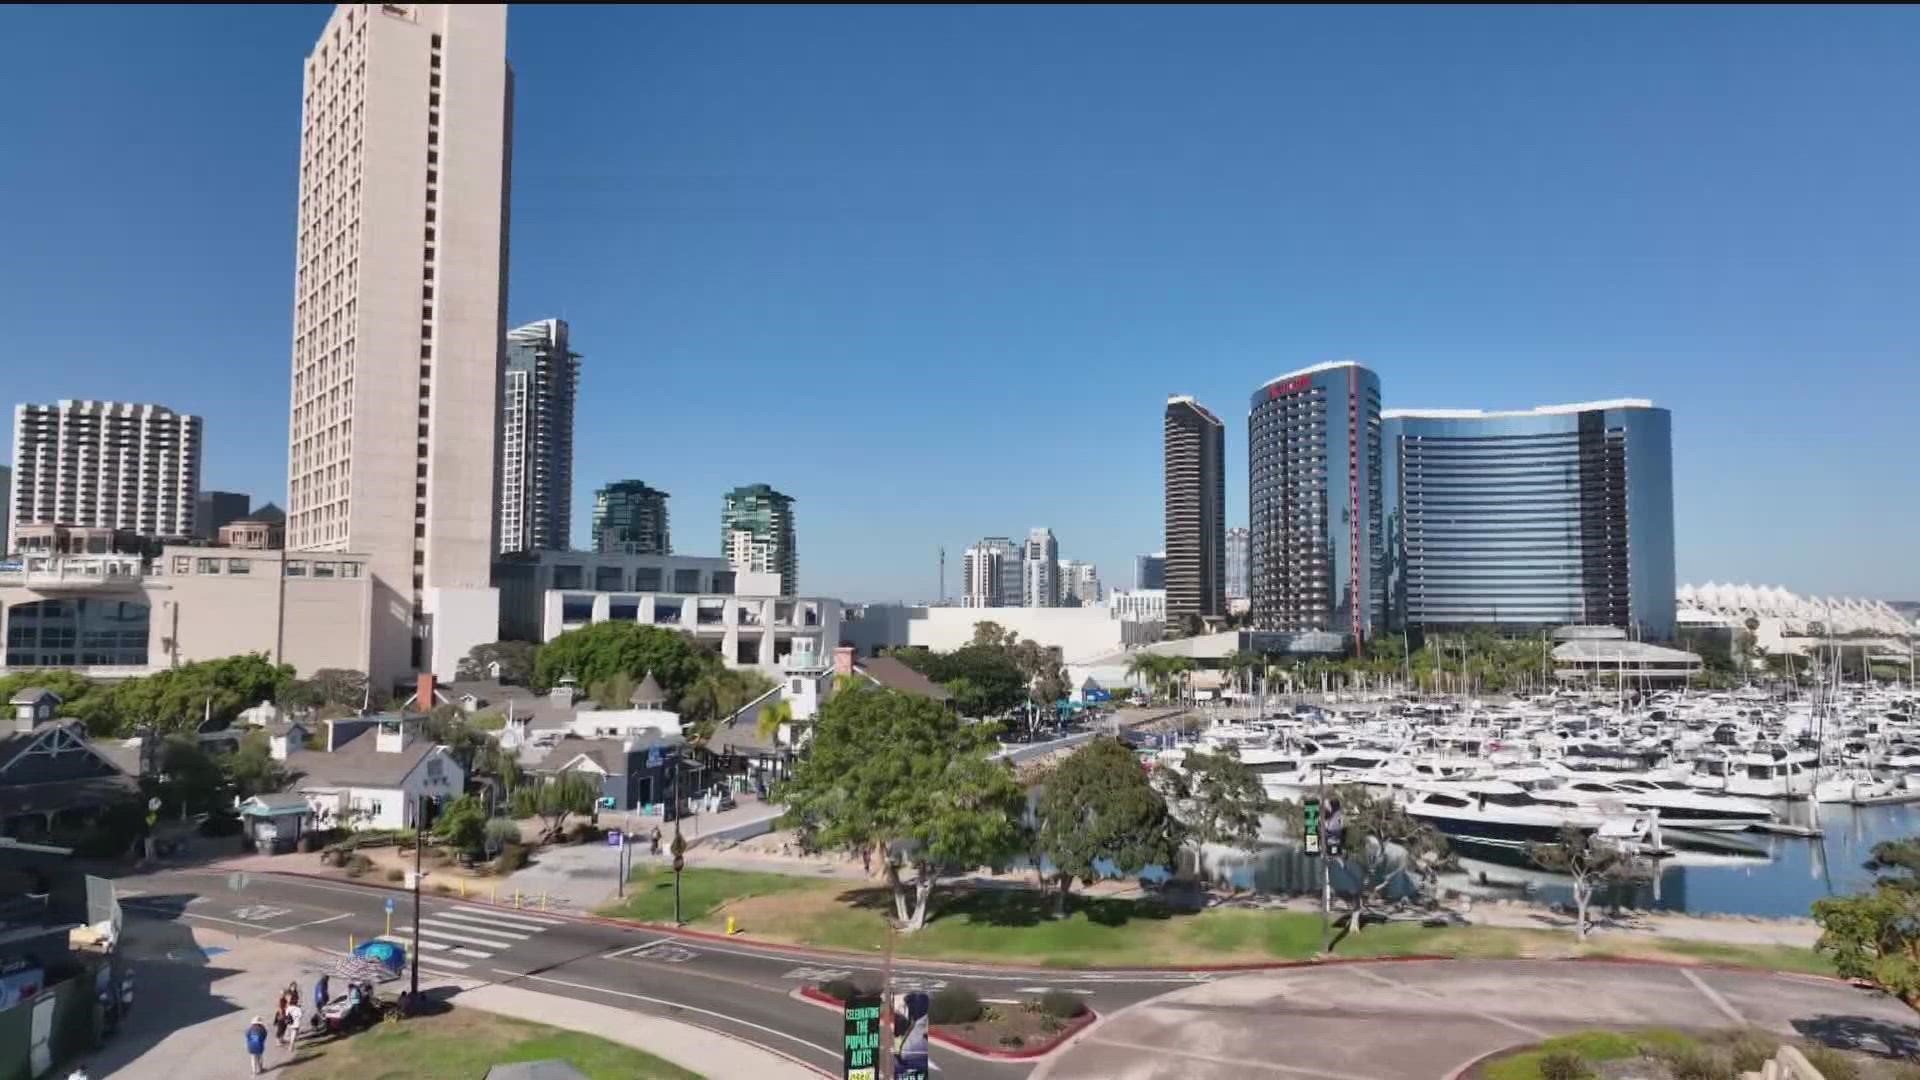 Finance website WalletHub chose San Diego among 100 of the country's largest cities.